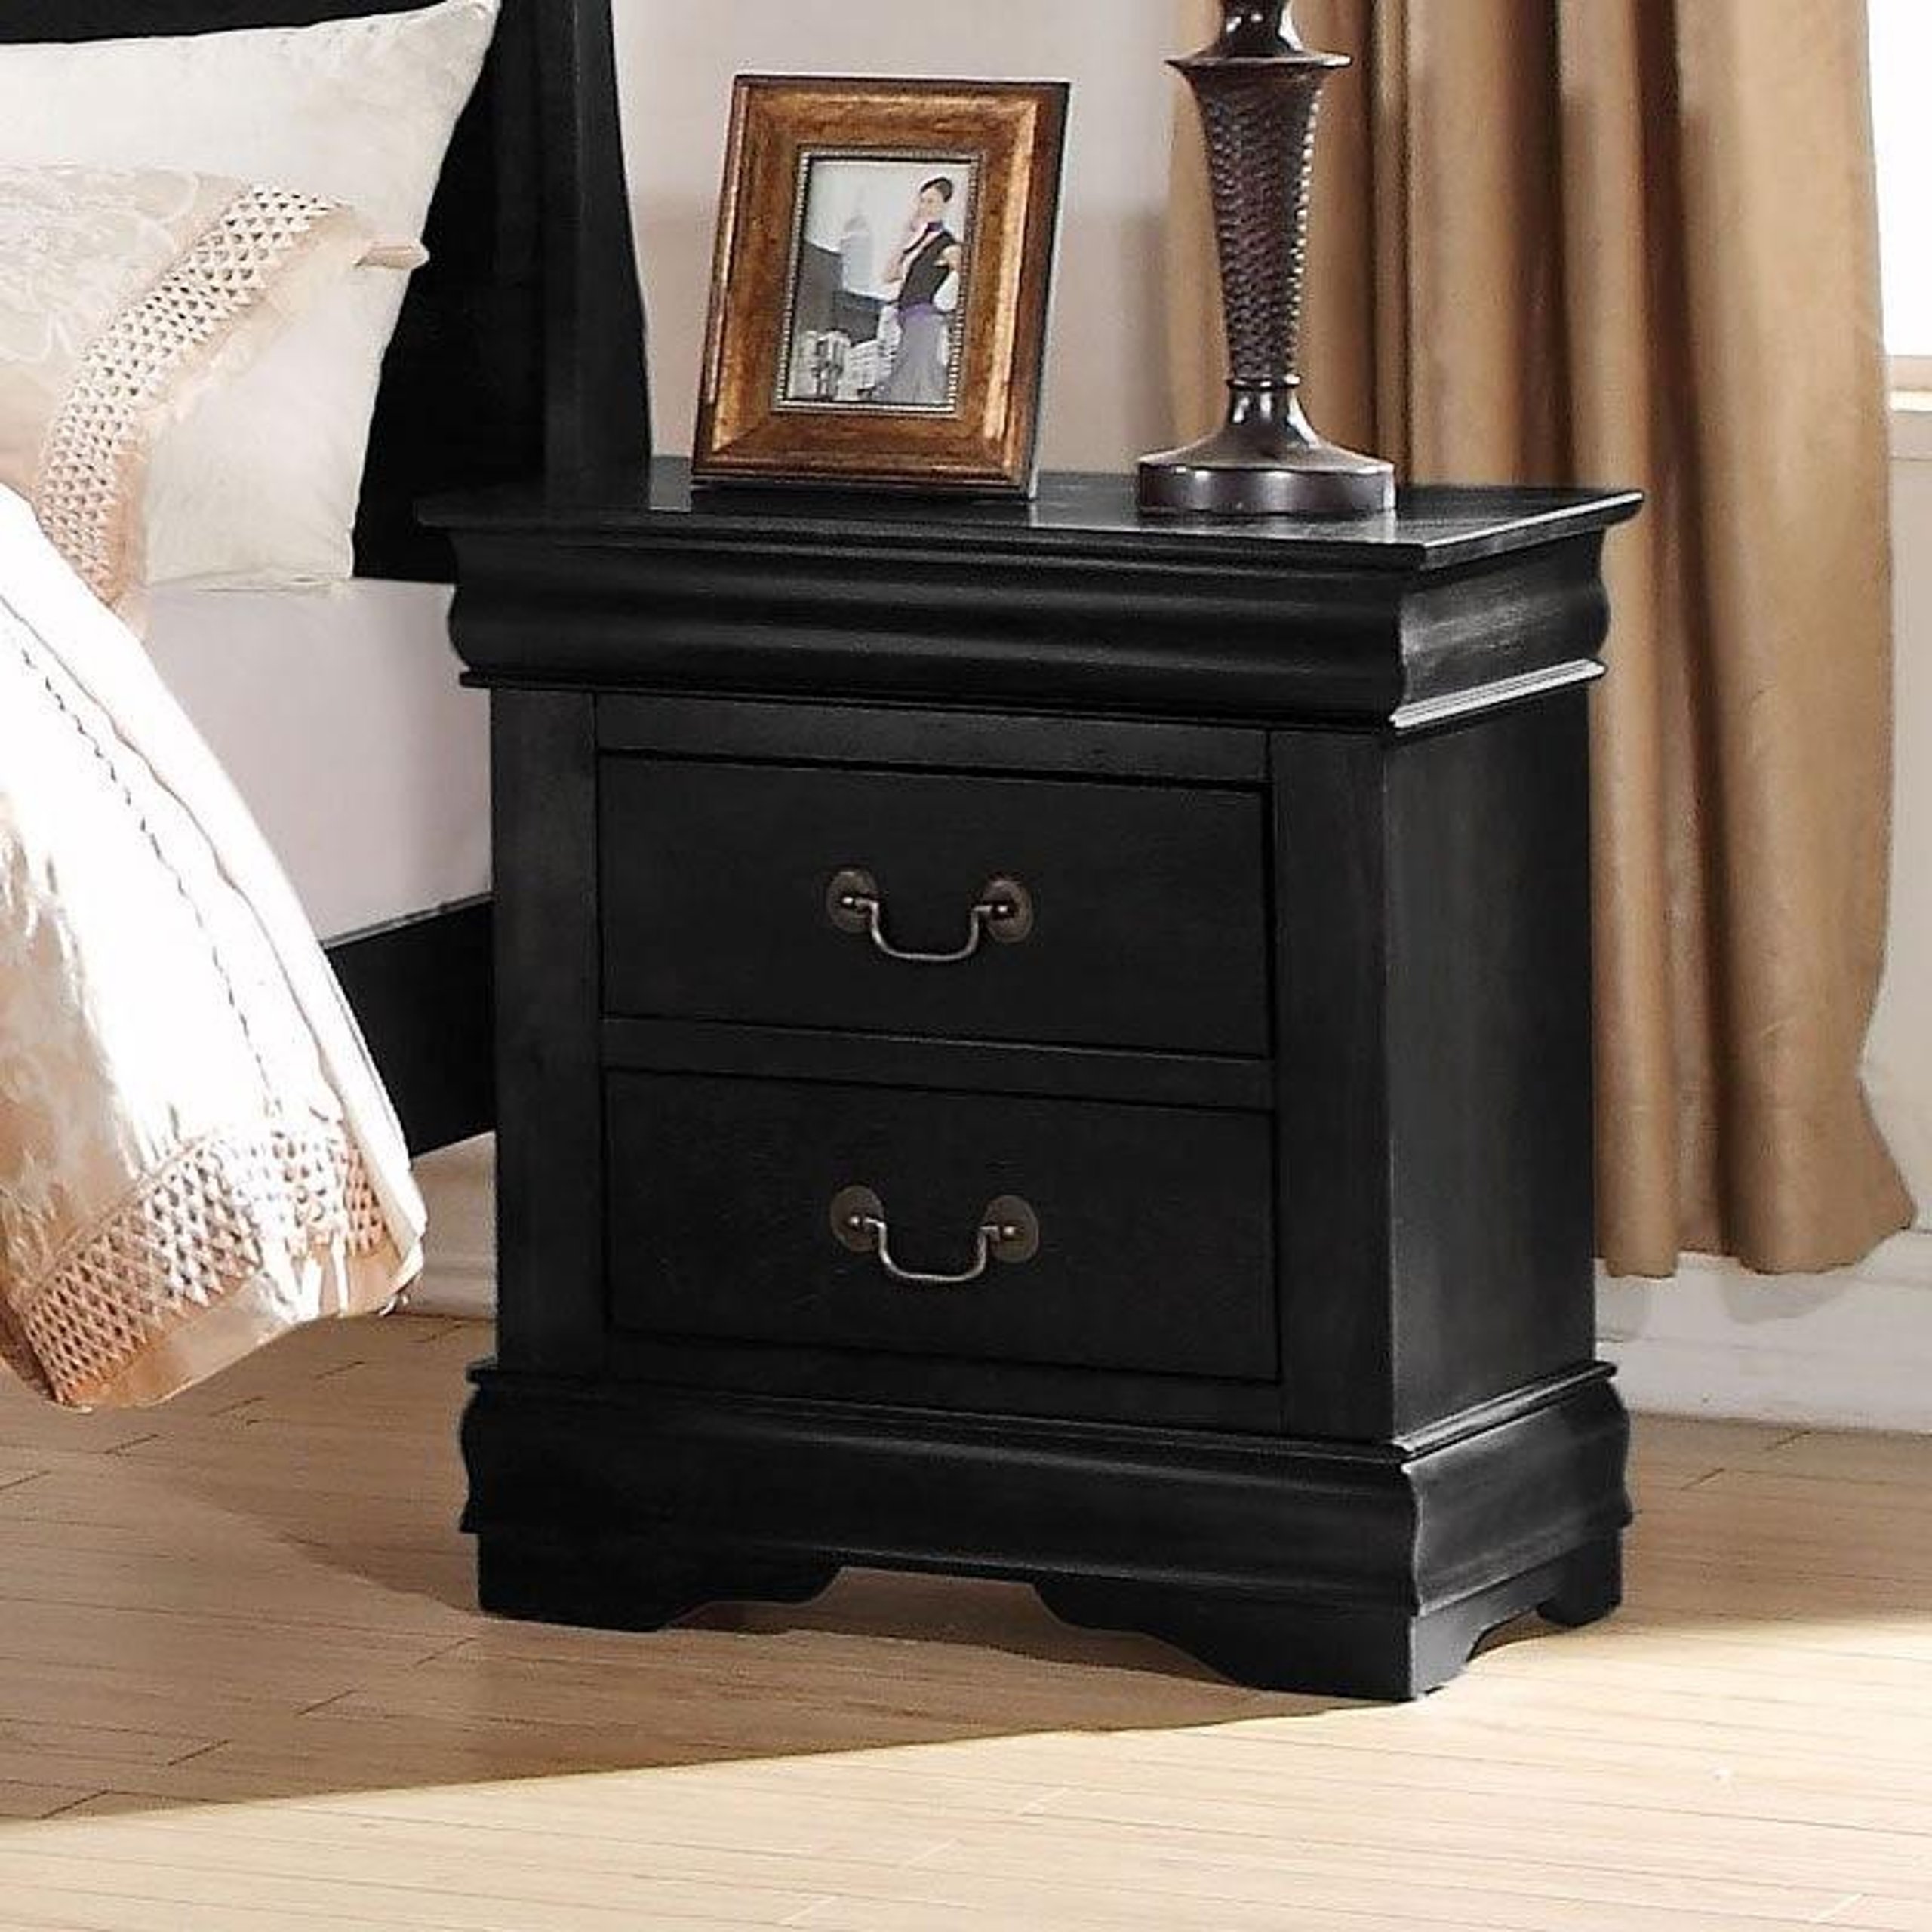 Louis Philippe Sleigh Bedroom Set (Black) by Acme Furniture